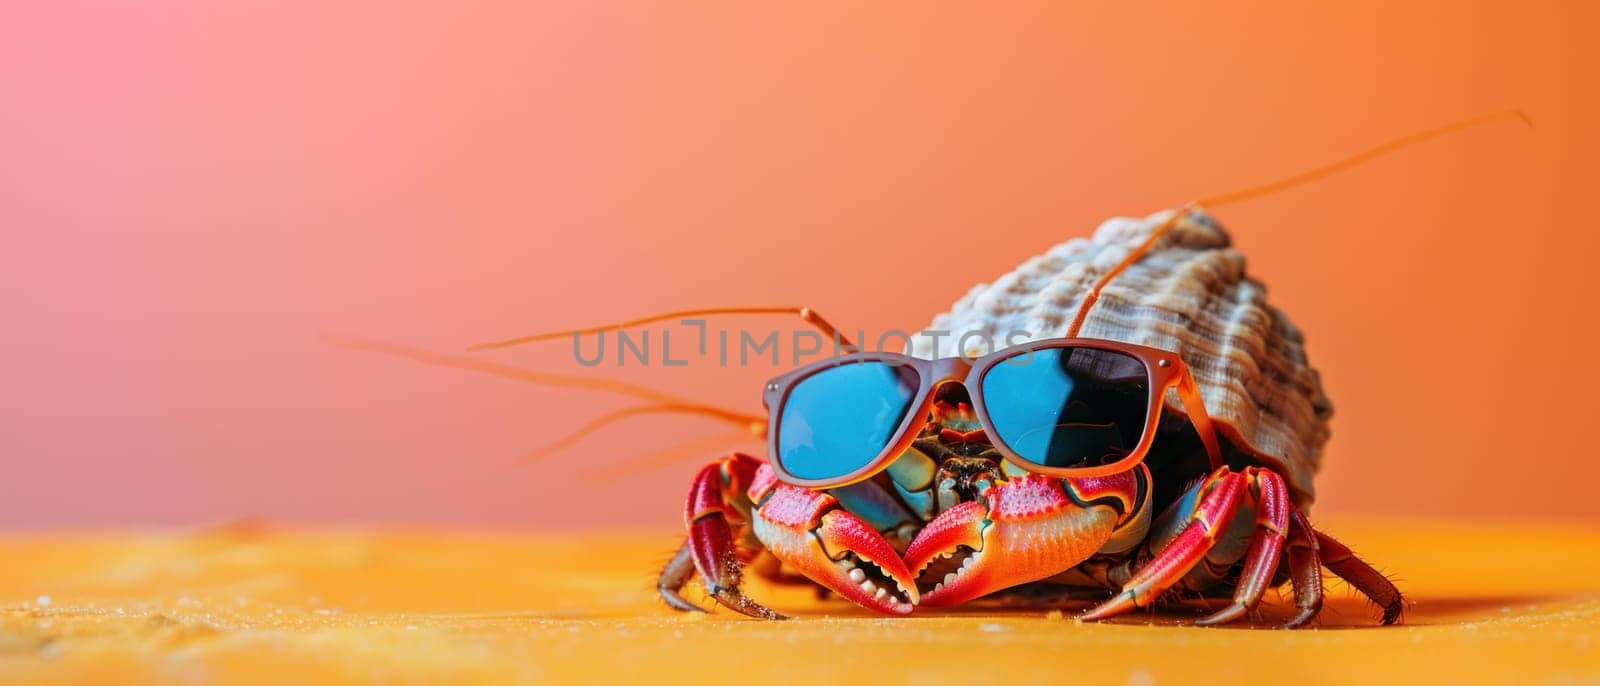 A crab wearing sunglasses is sitting on a sandy beach.